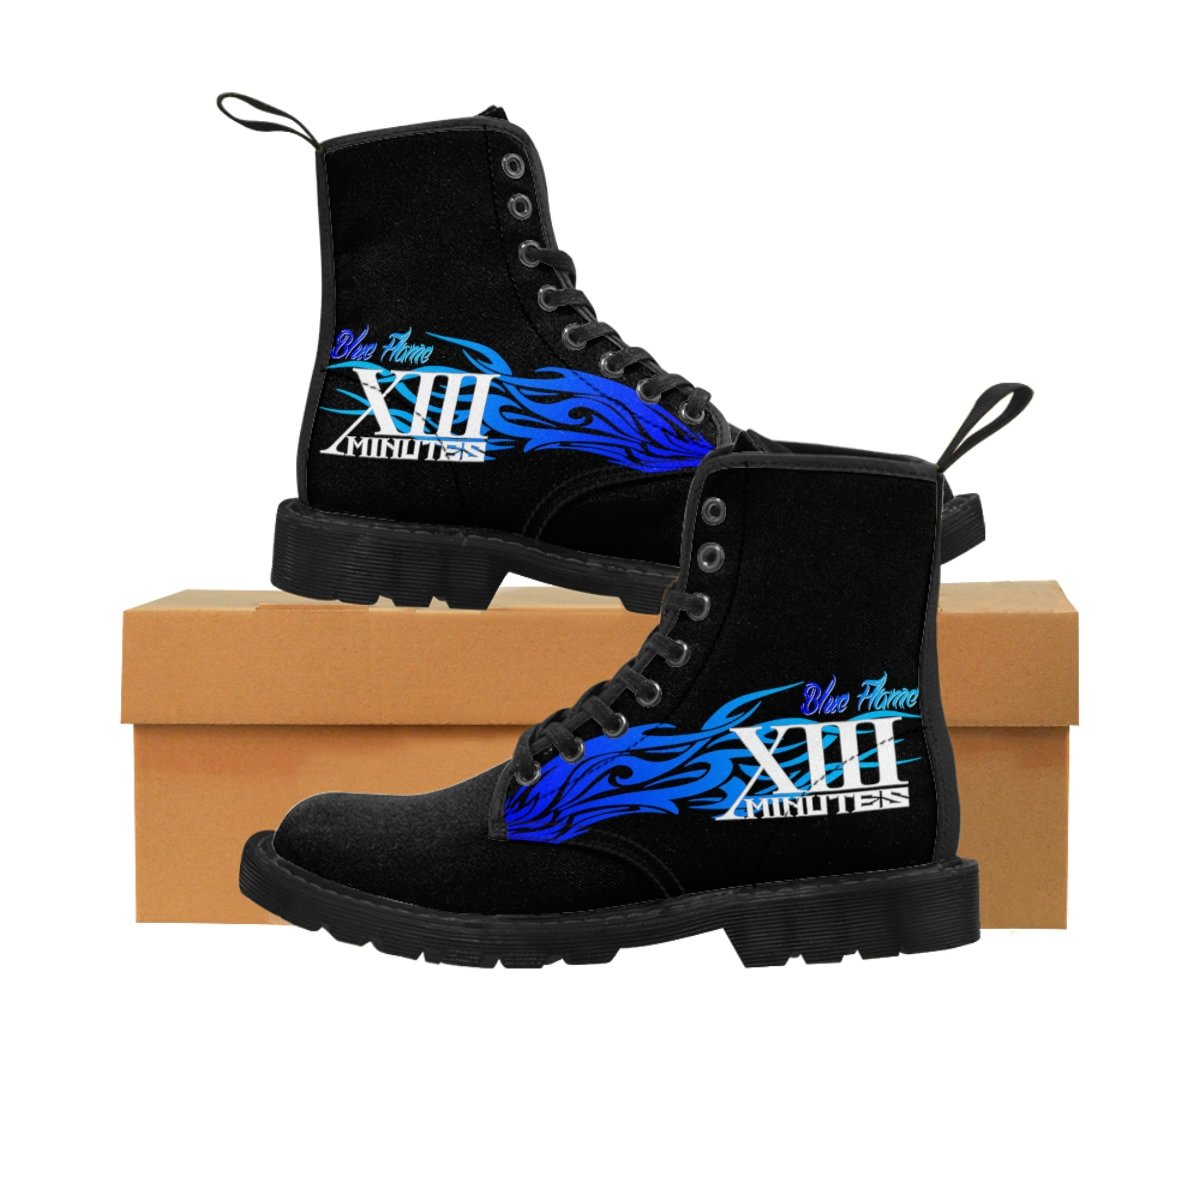 XIII Minutes Blue Flame Women’s Boots